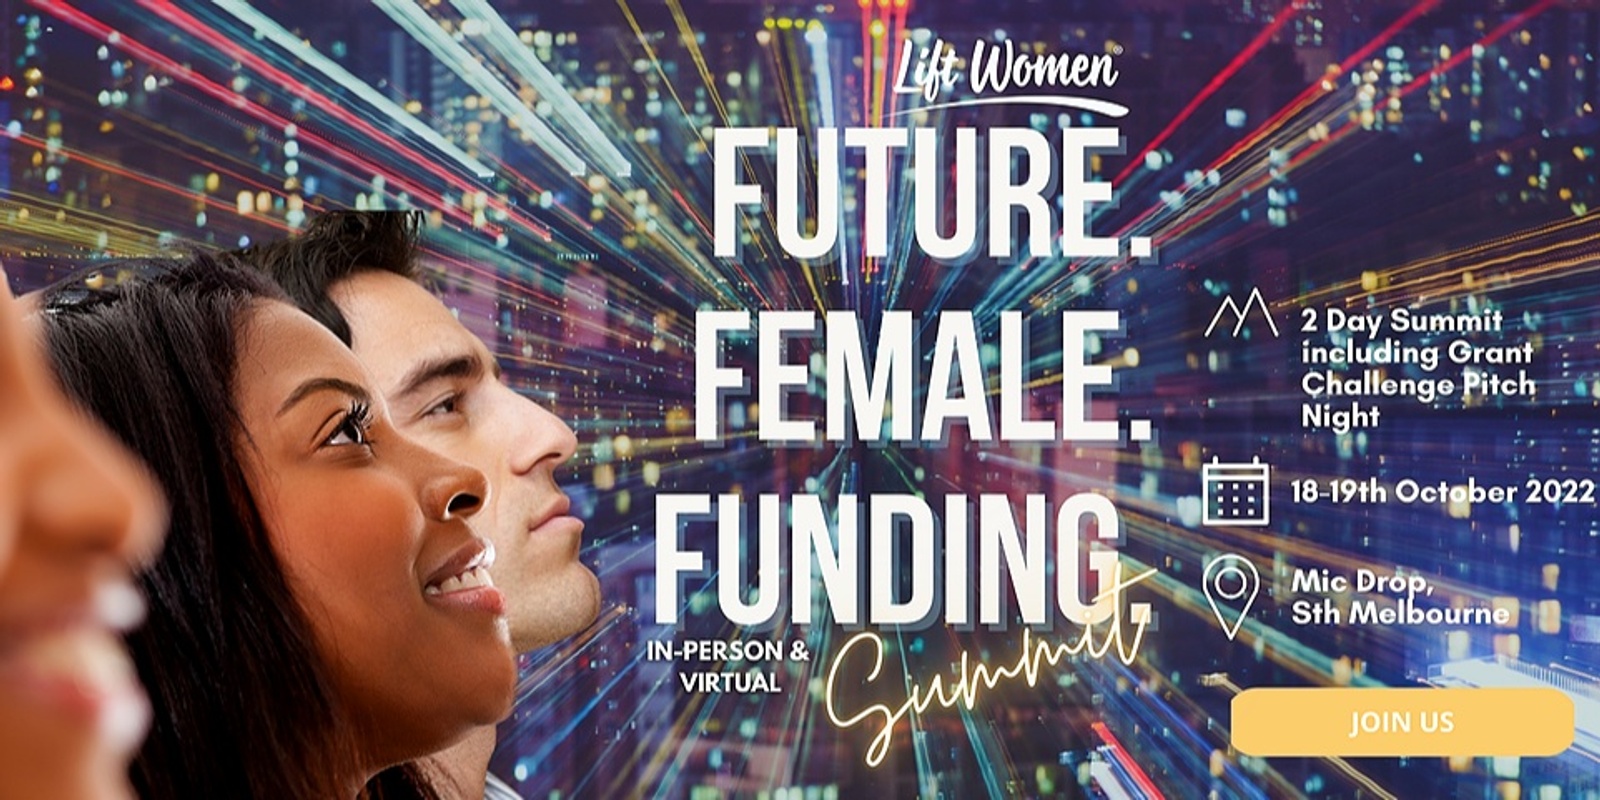 Banner image for Future. Female. Funding Summit by Lift Women